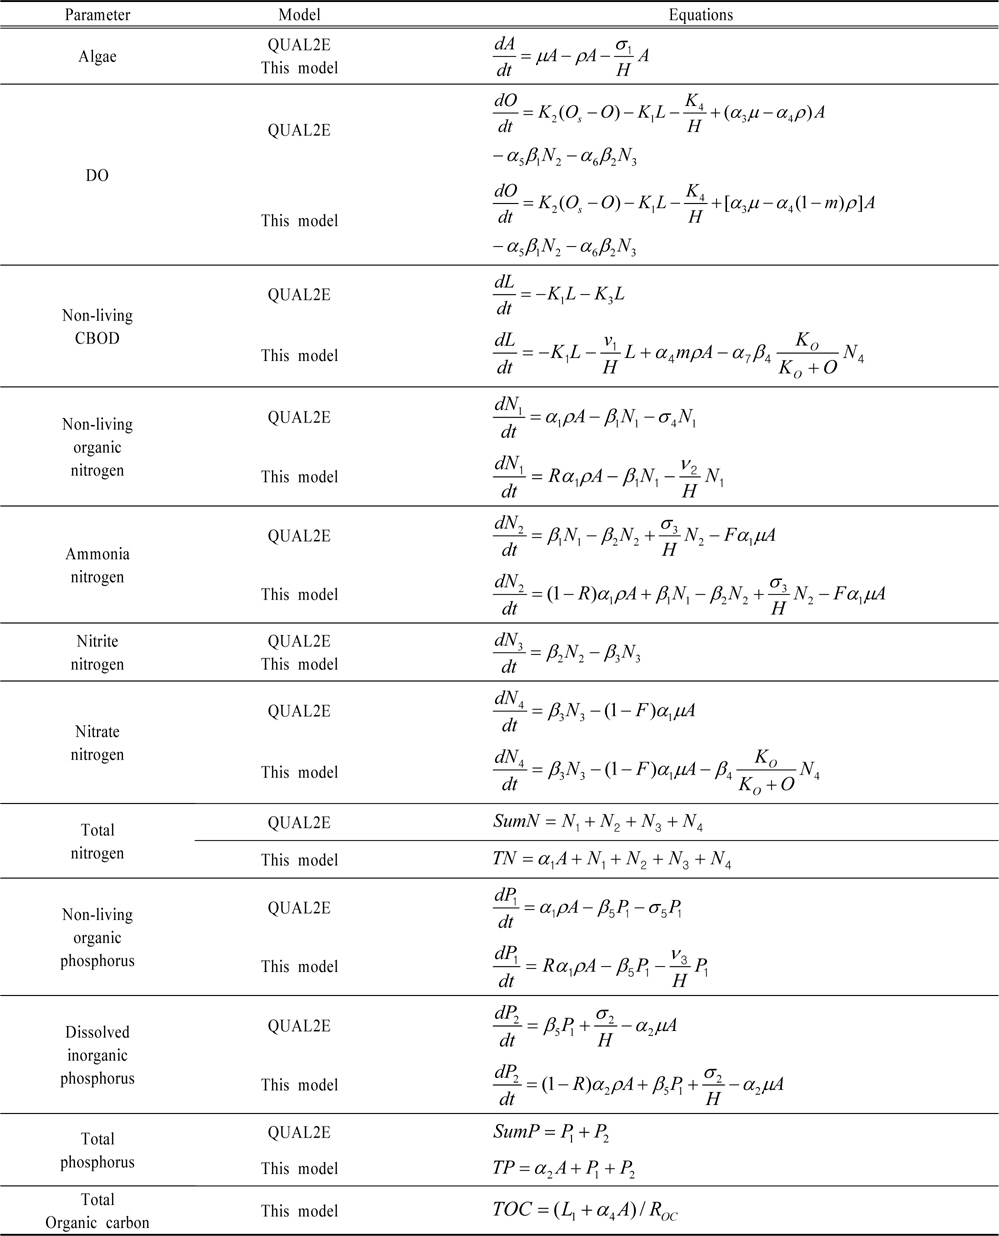 Modified equations in this model compared with those in QUAL2E